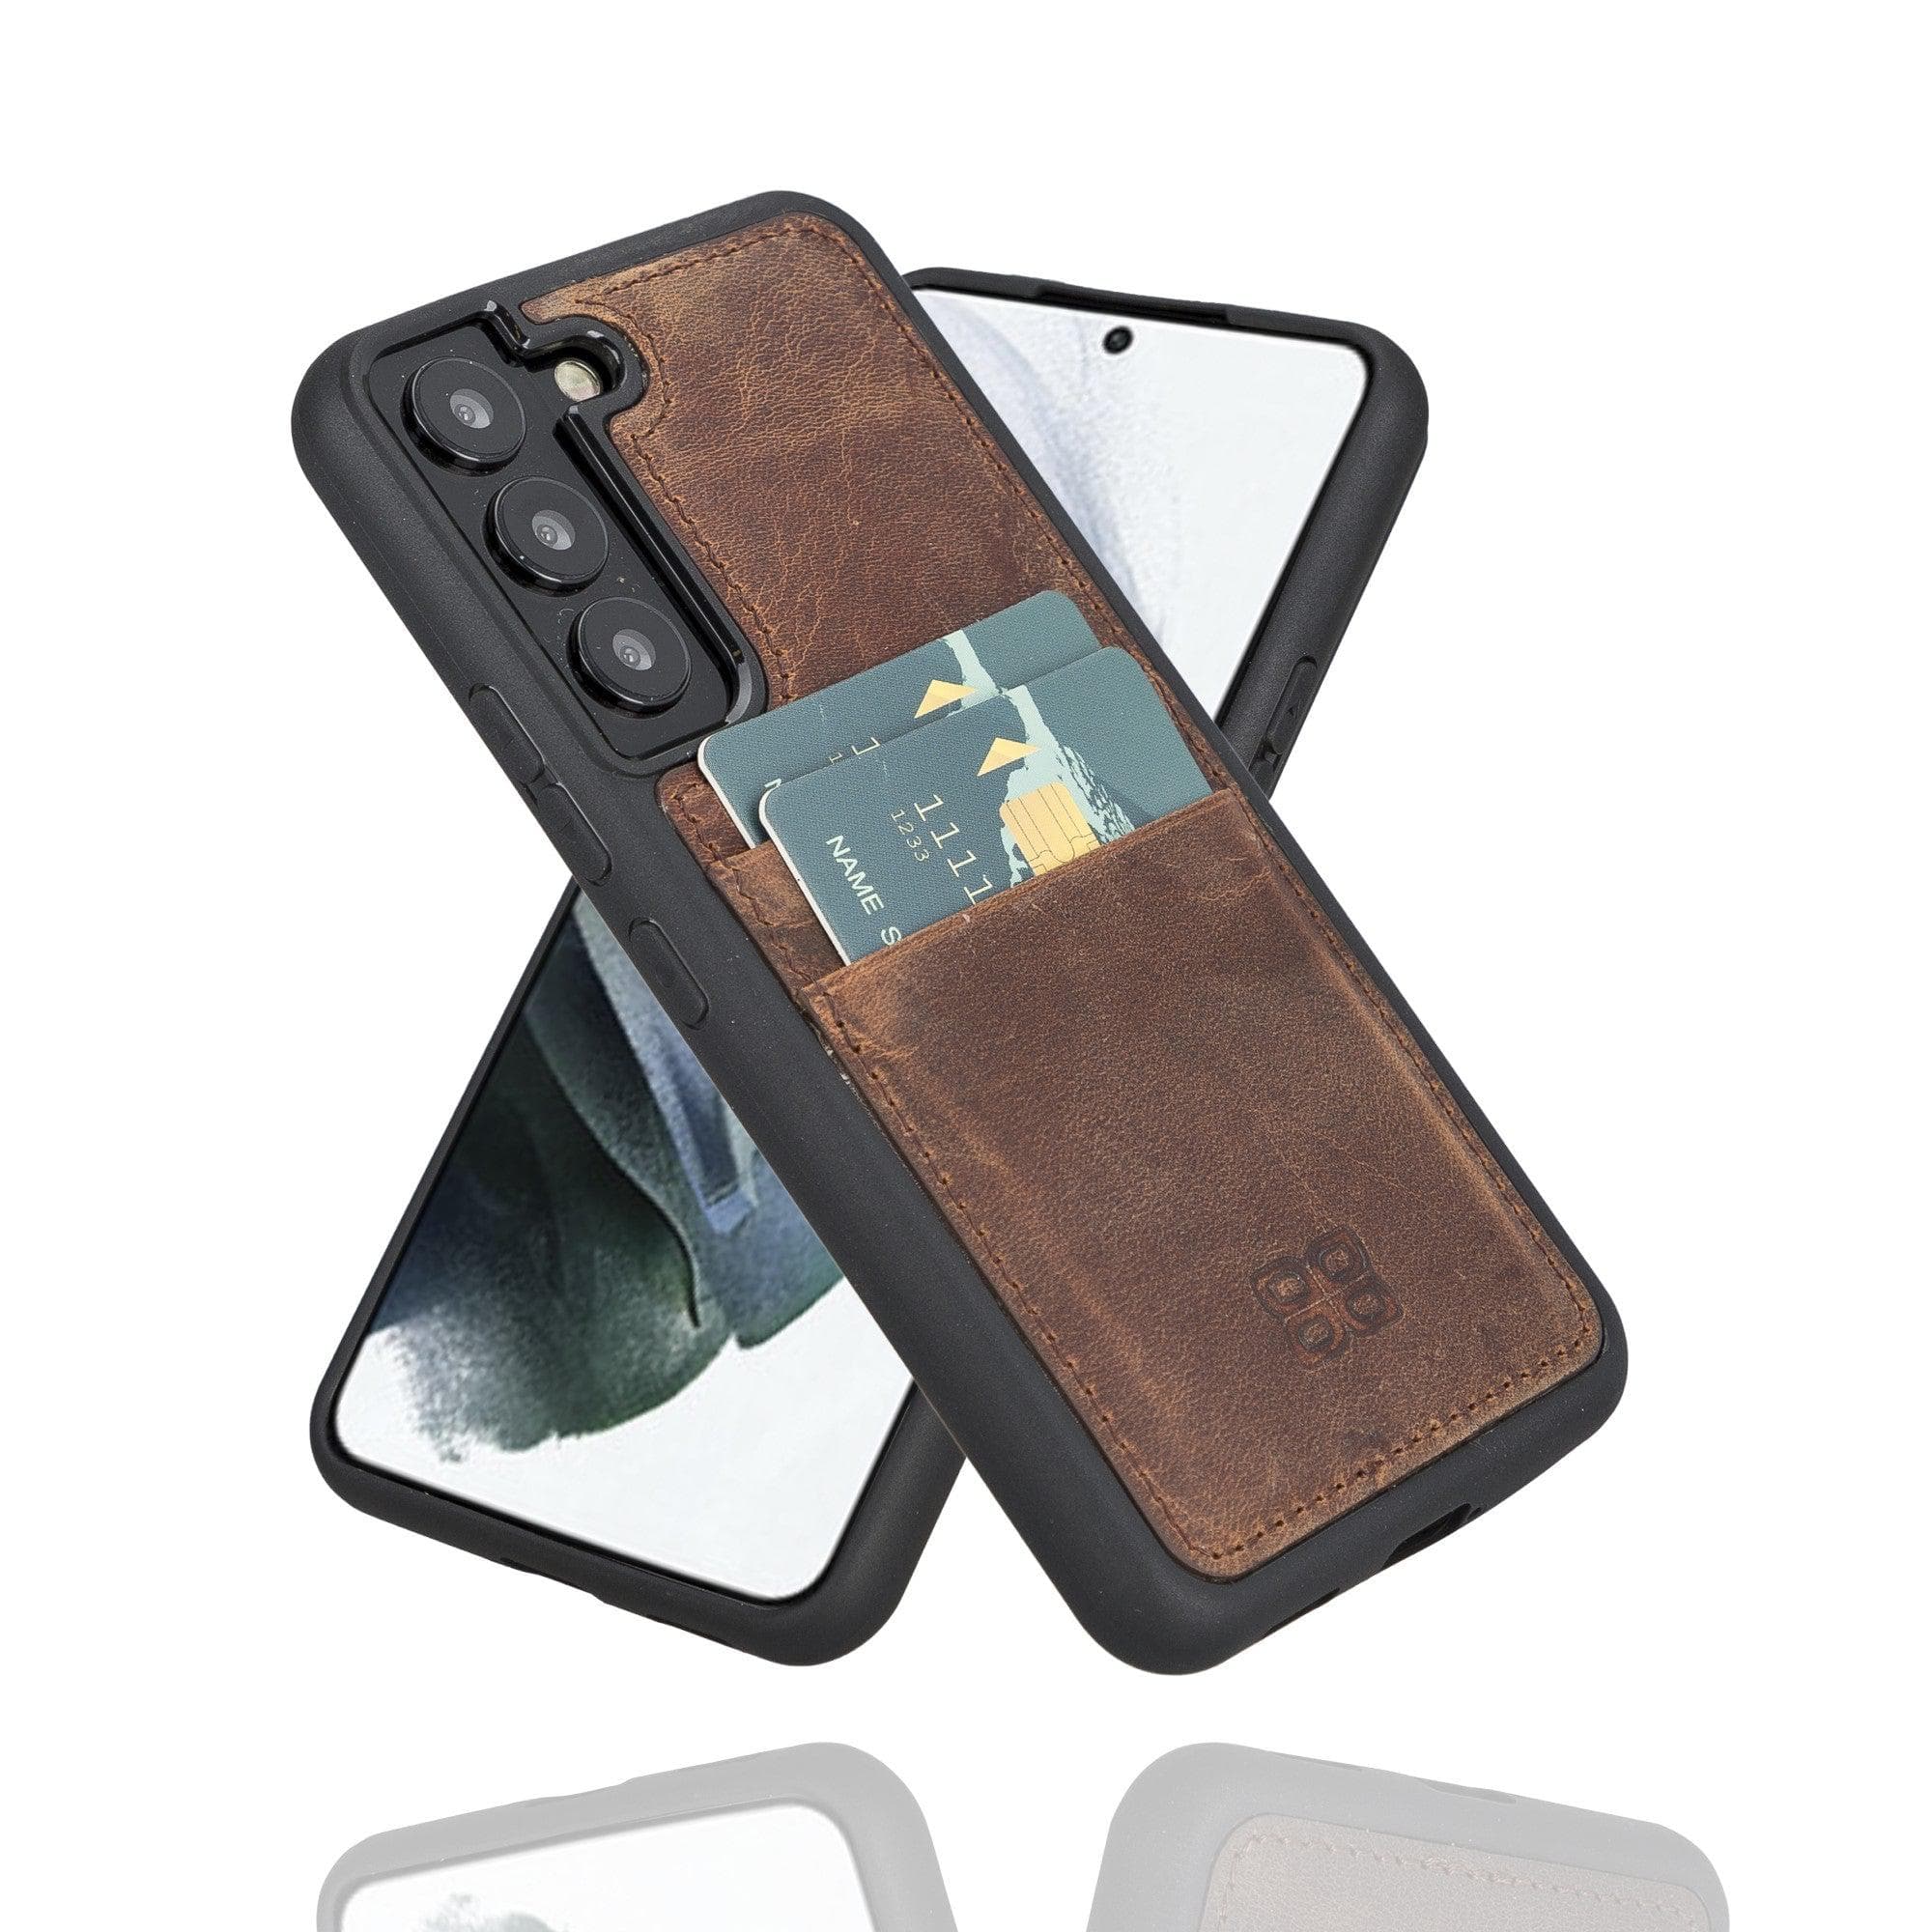 Samsung Galaxy S22 Series Genuine Leather Slim Back Cover Case with Card Holders Samsung Galaxy S22 / Antic Brown Bouletta